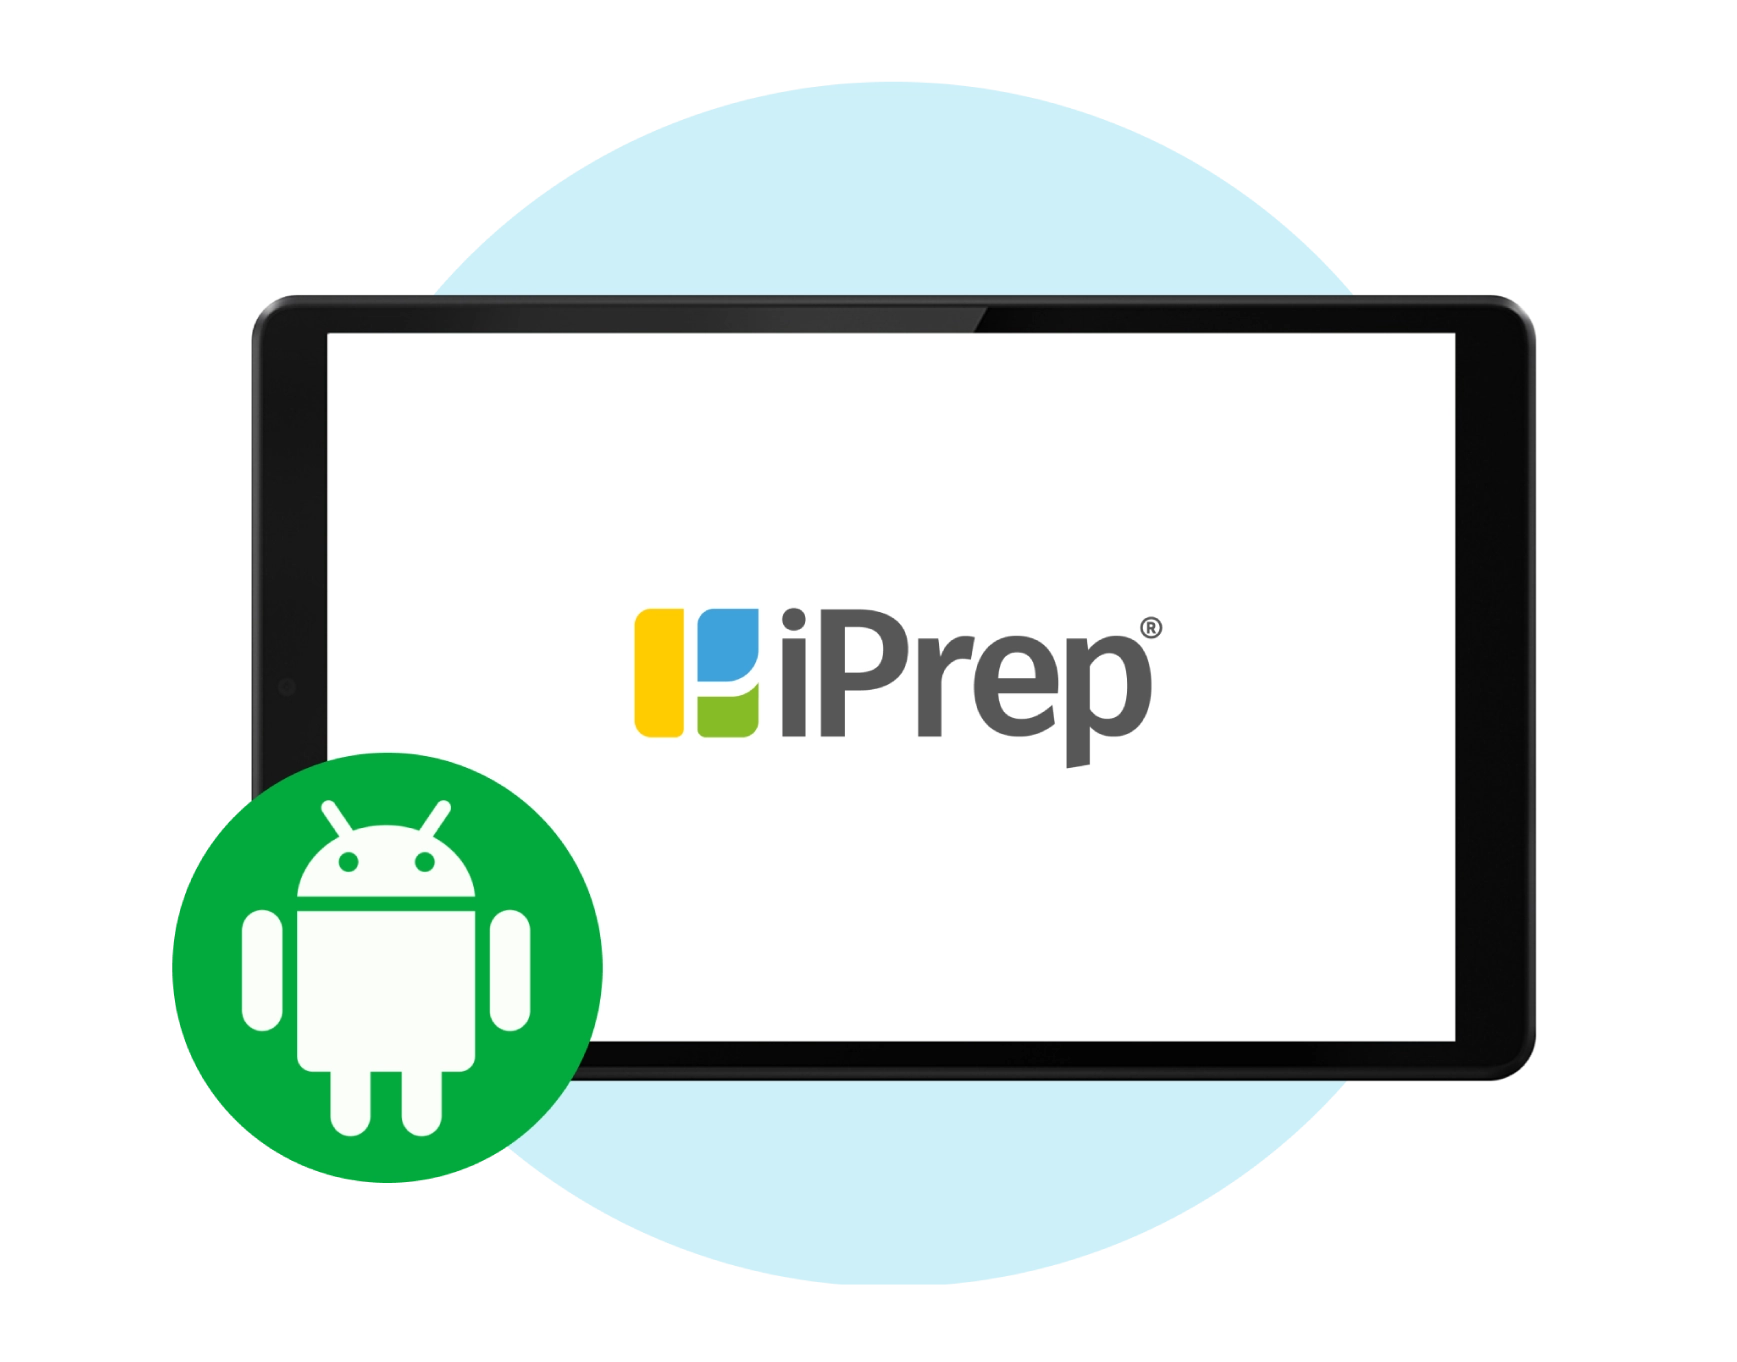 Image of Android-based iPrep Tablet, a Learning Tablet with preloaded Digital Content on the tablet for students by iDream Education